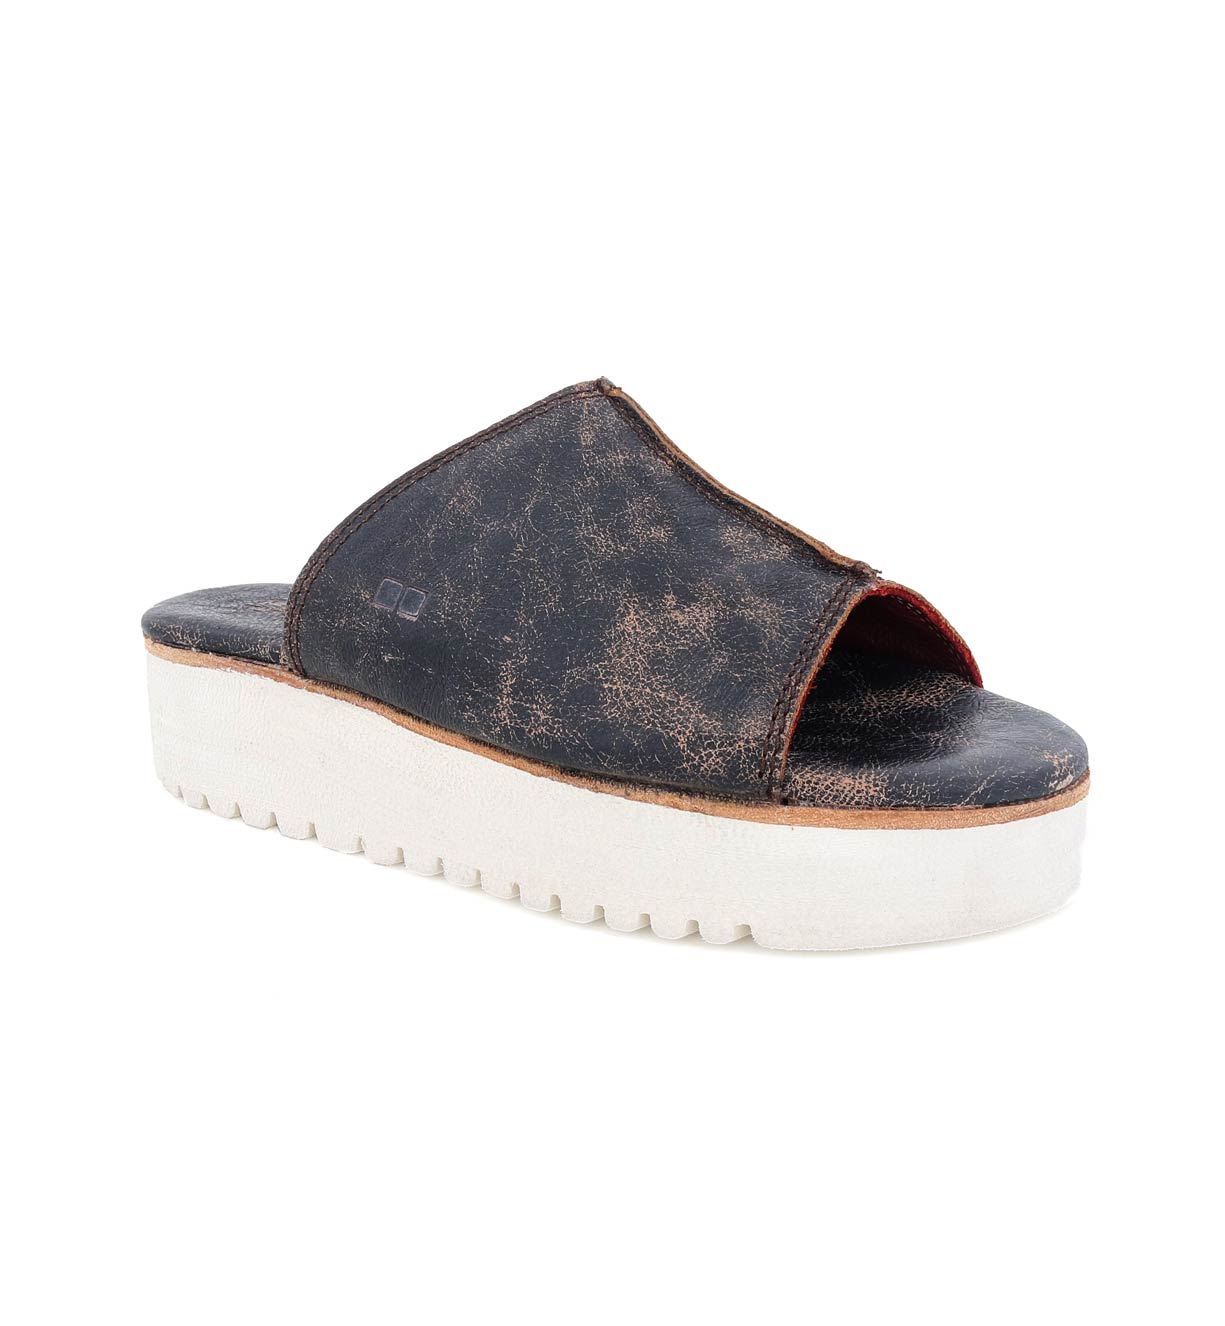 A women's Fairlee II black leather slide on sandal with a white outsole by Bed Stu.